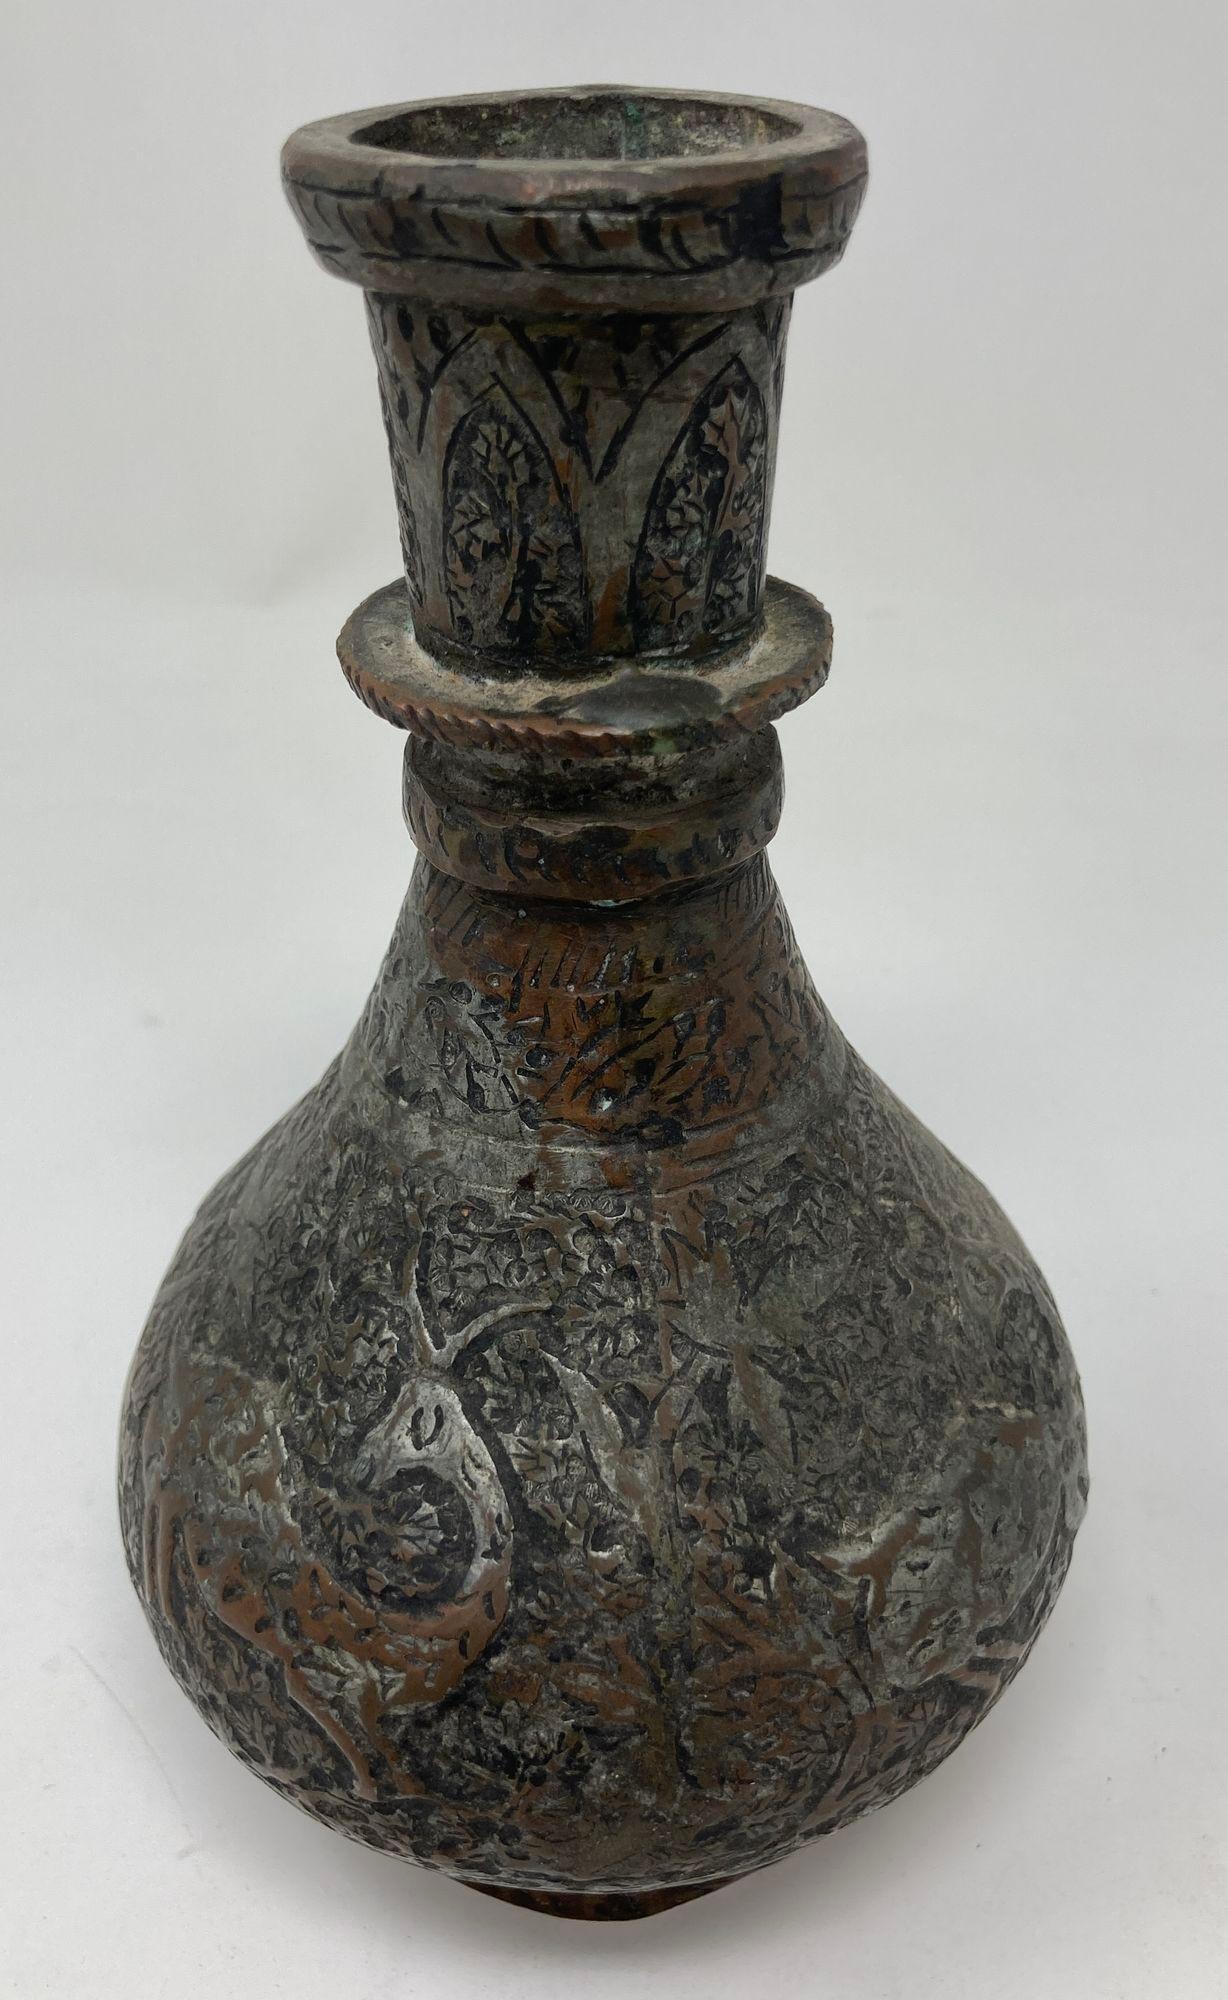 Antique Islamic metal copper hookah bottle base of spherical form and decorated with a recessed repeated floral, geometric motif with a deer figure.
19th century Bronze tinned copper Indo-Persian Islamic vase, hand- chased metal with a very dark